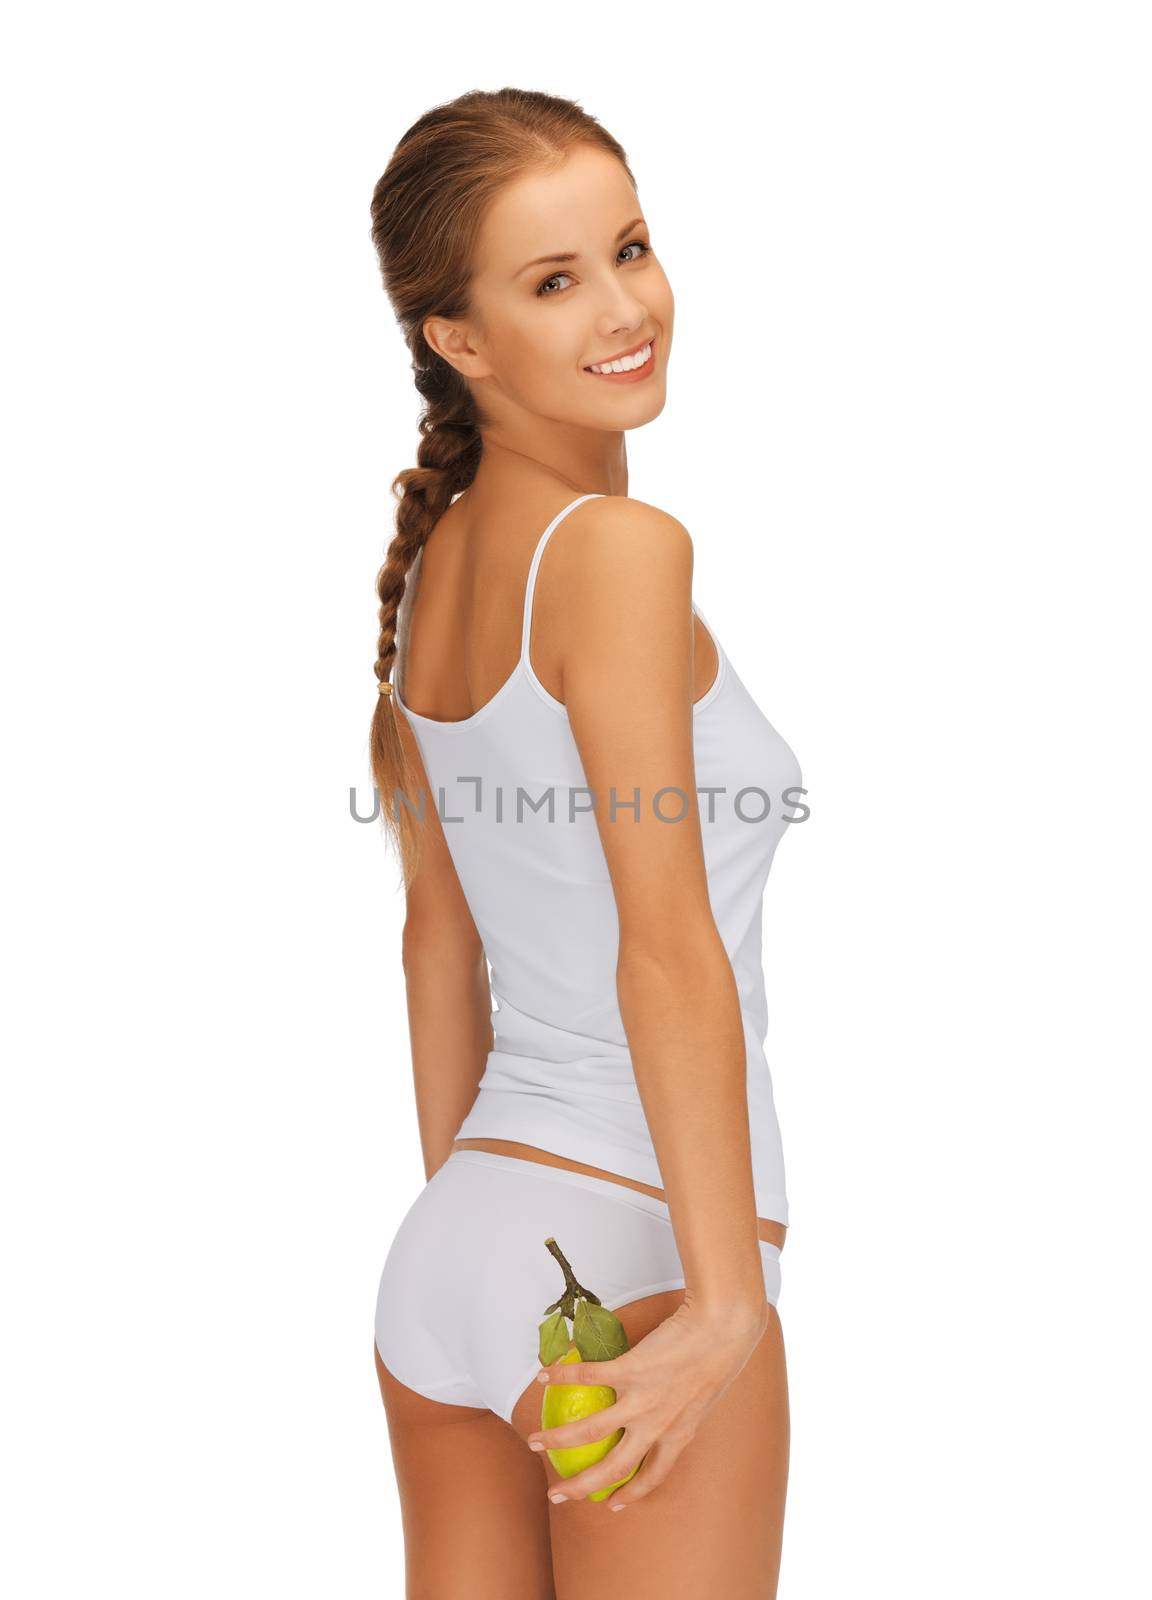 picture of woman in with yellow lemon showing slimming concept